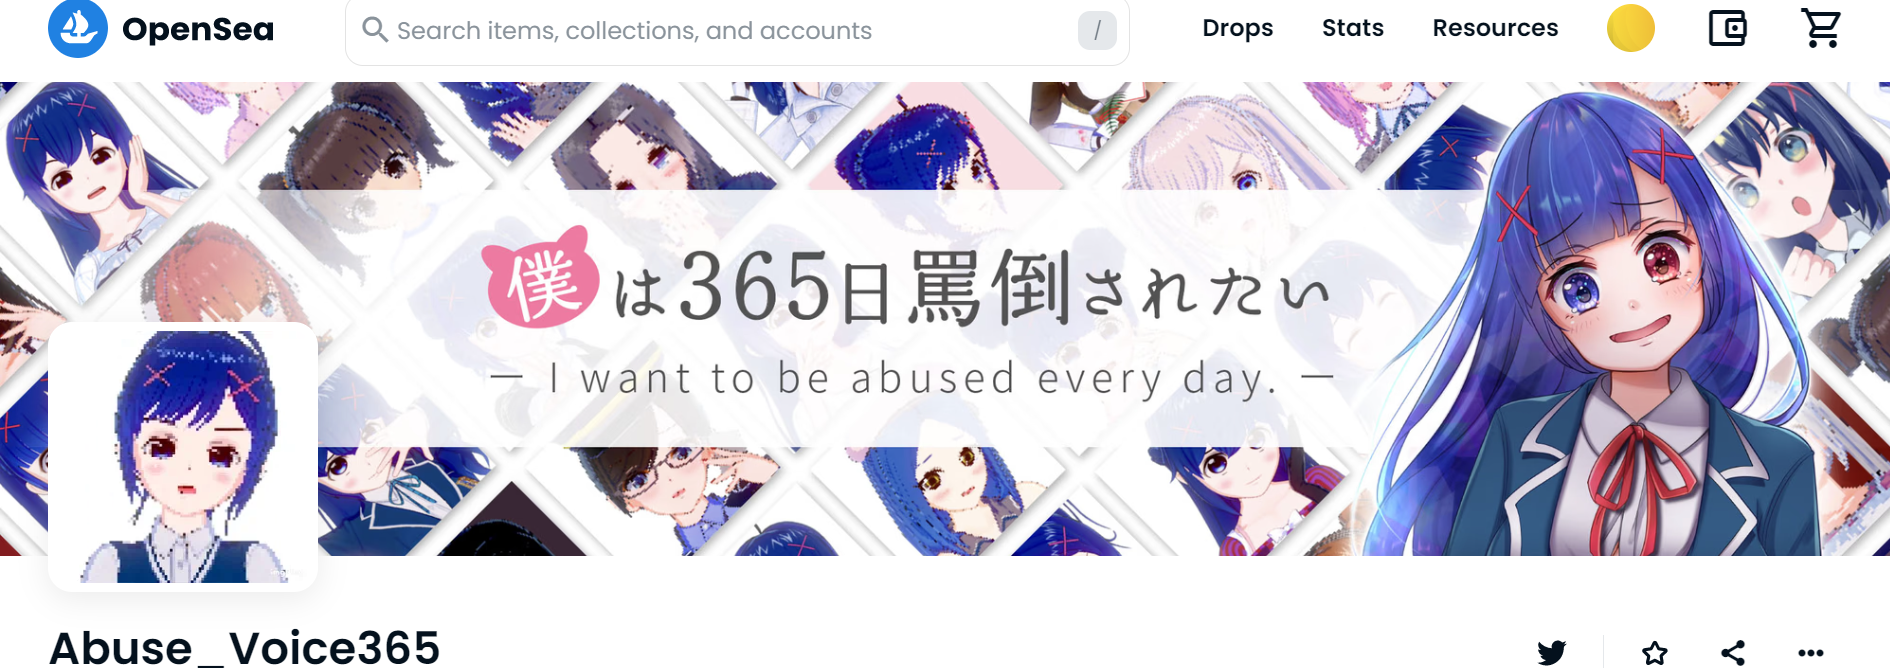 1.Abuse_Voice365　365日の罵倒vice